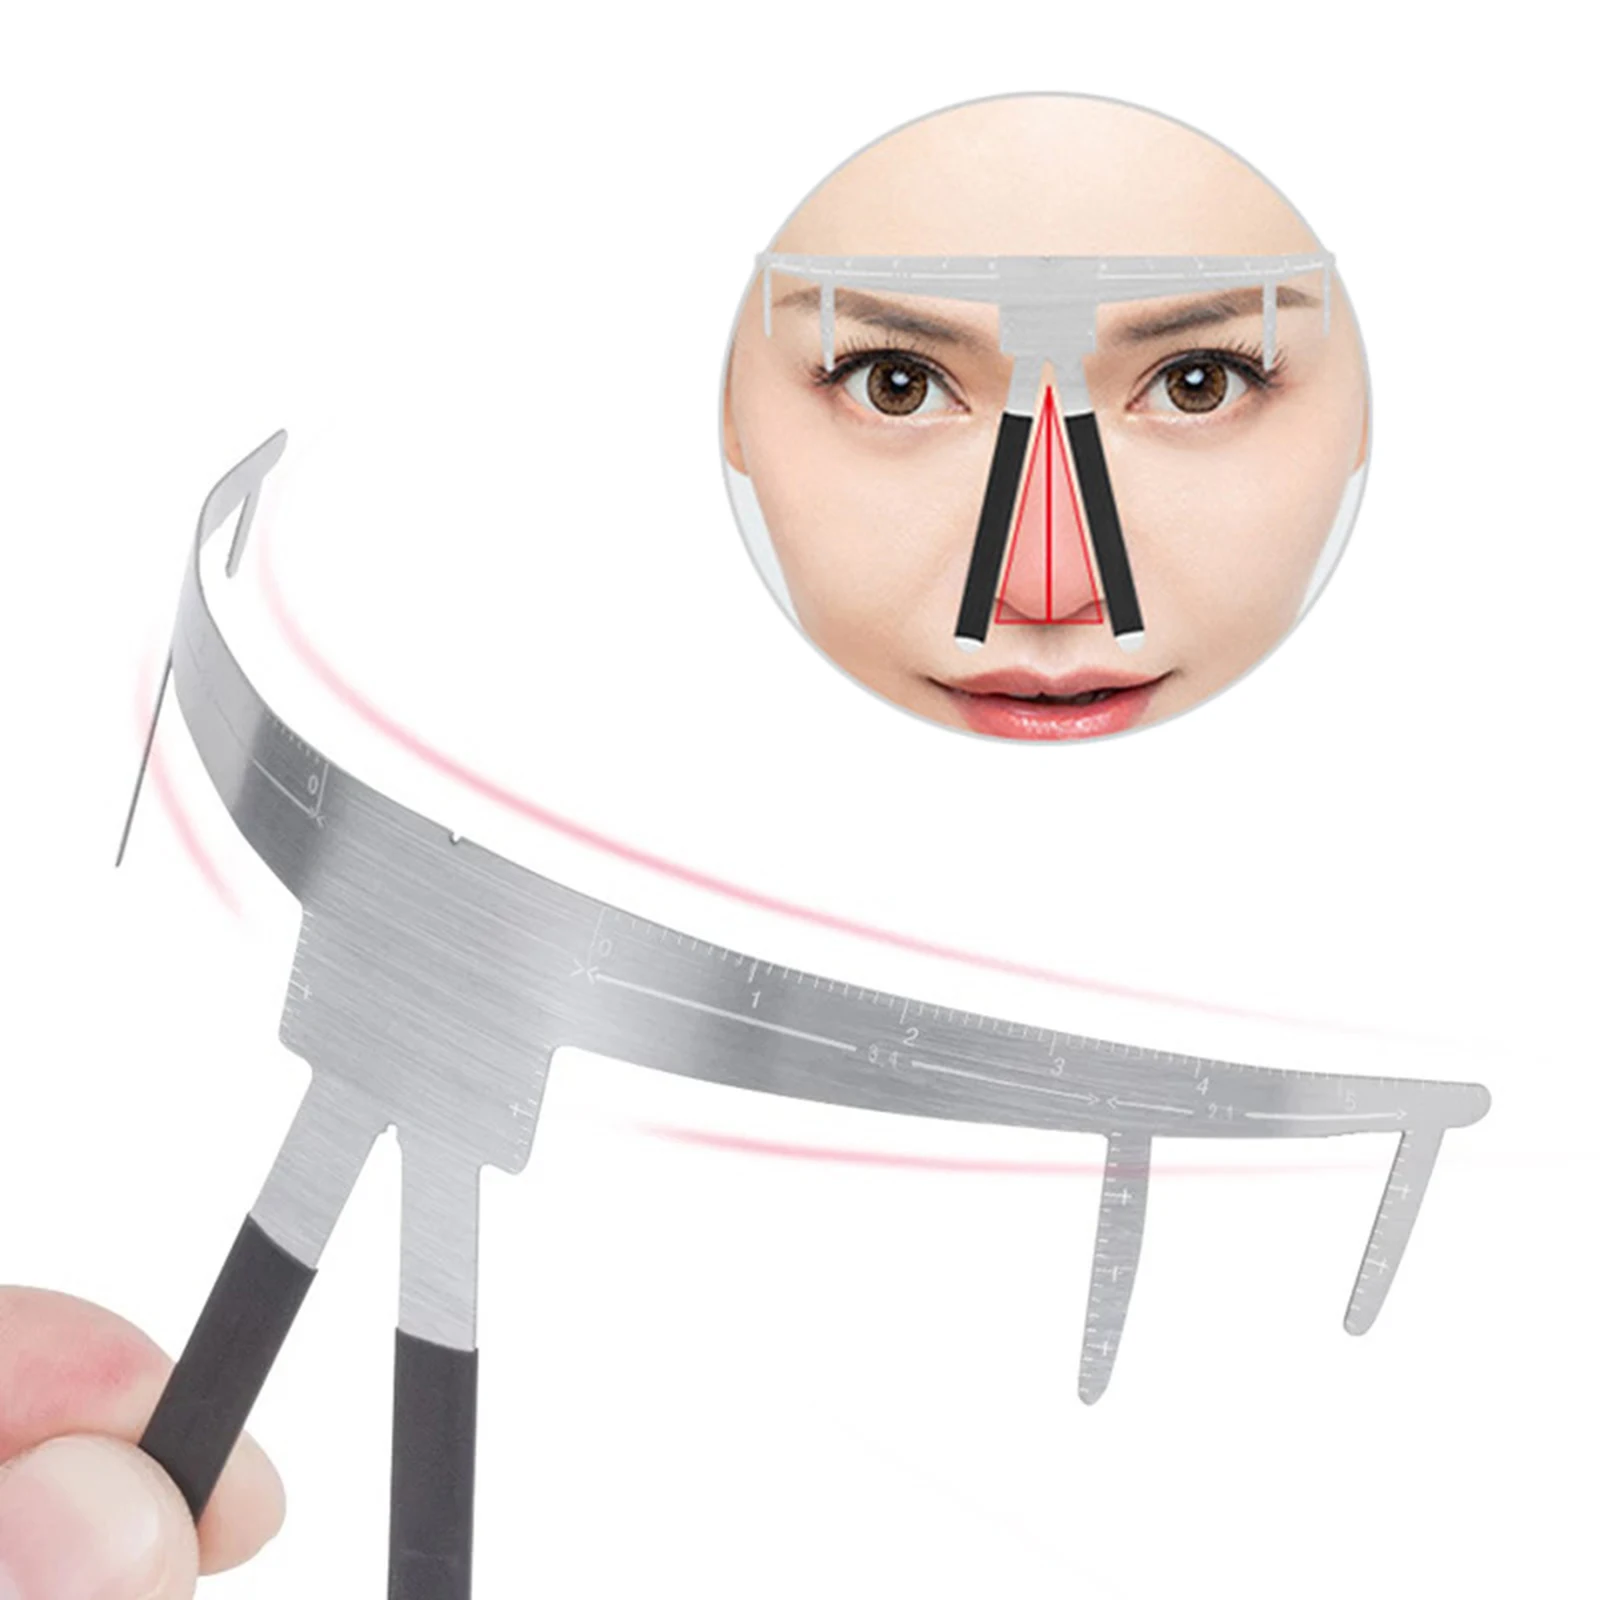 Stainless Steel Tattoo Eyebrow Ruler Measure Ruler Grooming Stencil Shaper Permanent Makeup Supplies Tool for Eyebrow Measuring